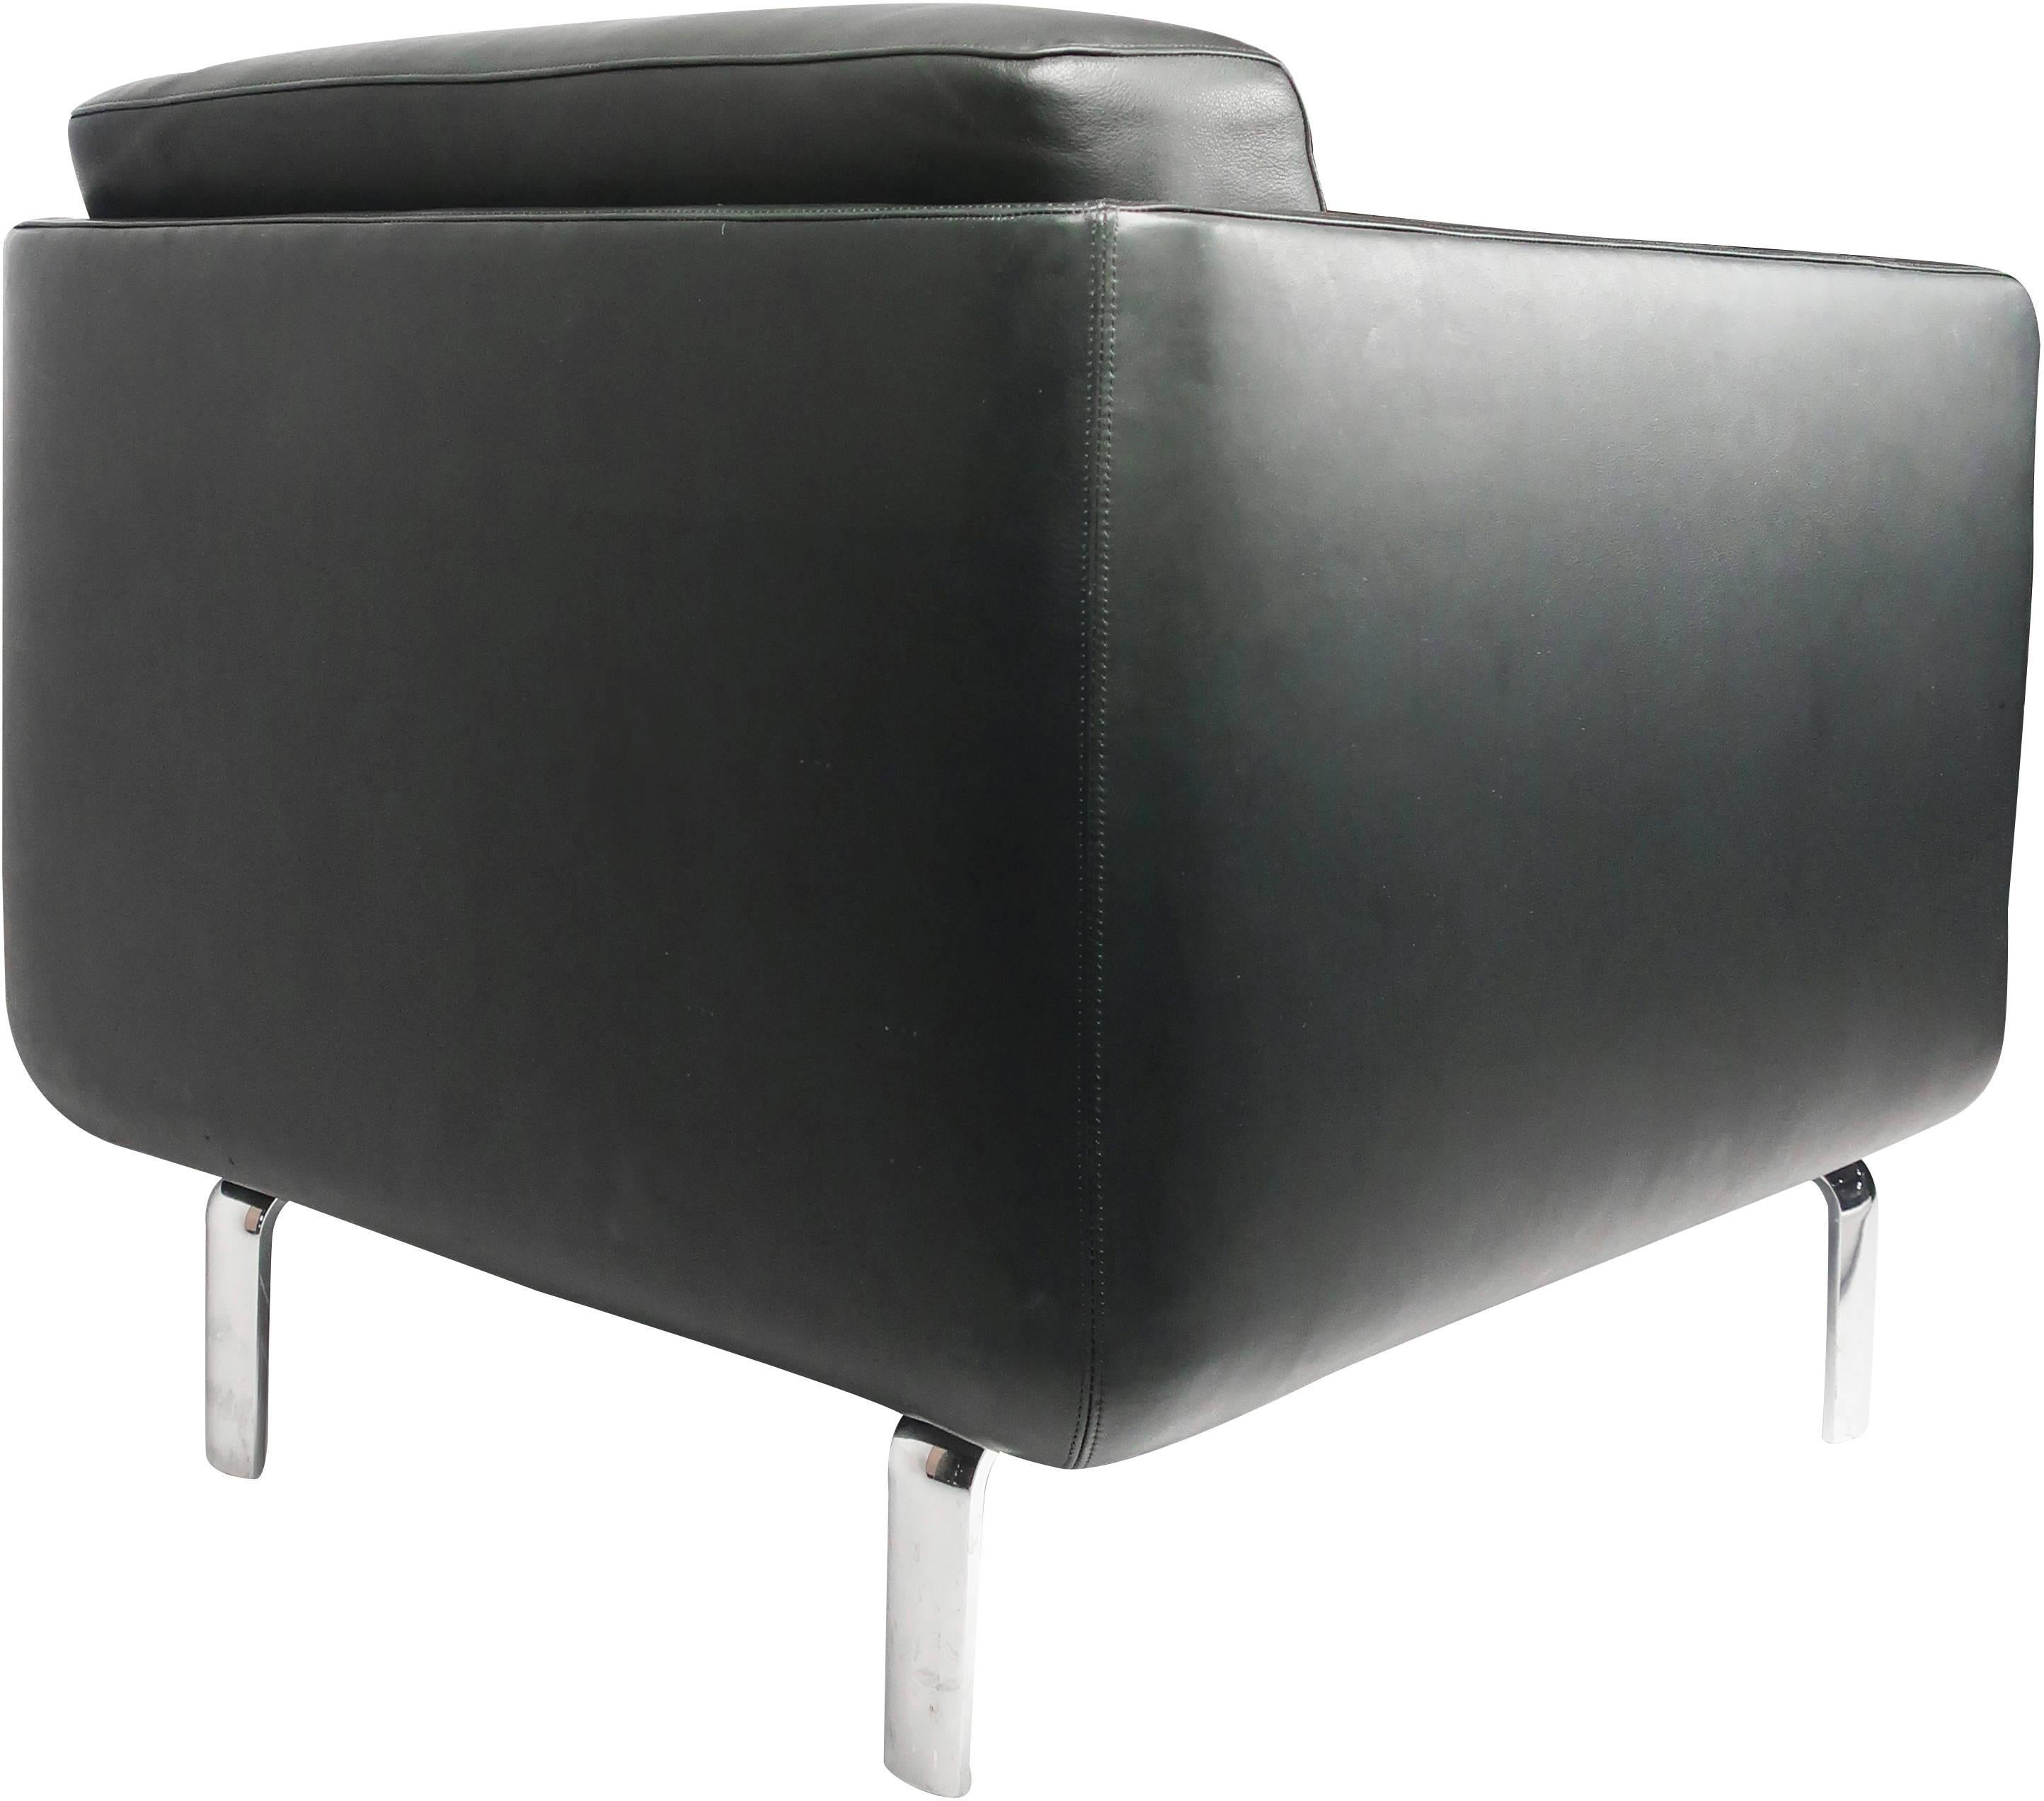 Black Leather Gaia Armchair by Arik Levy for Bernhardt Design In Good Condition For Sale In Brooklyn, NY